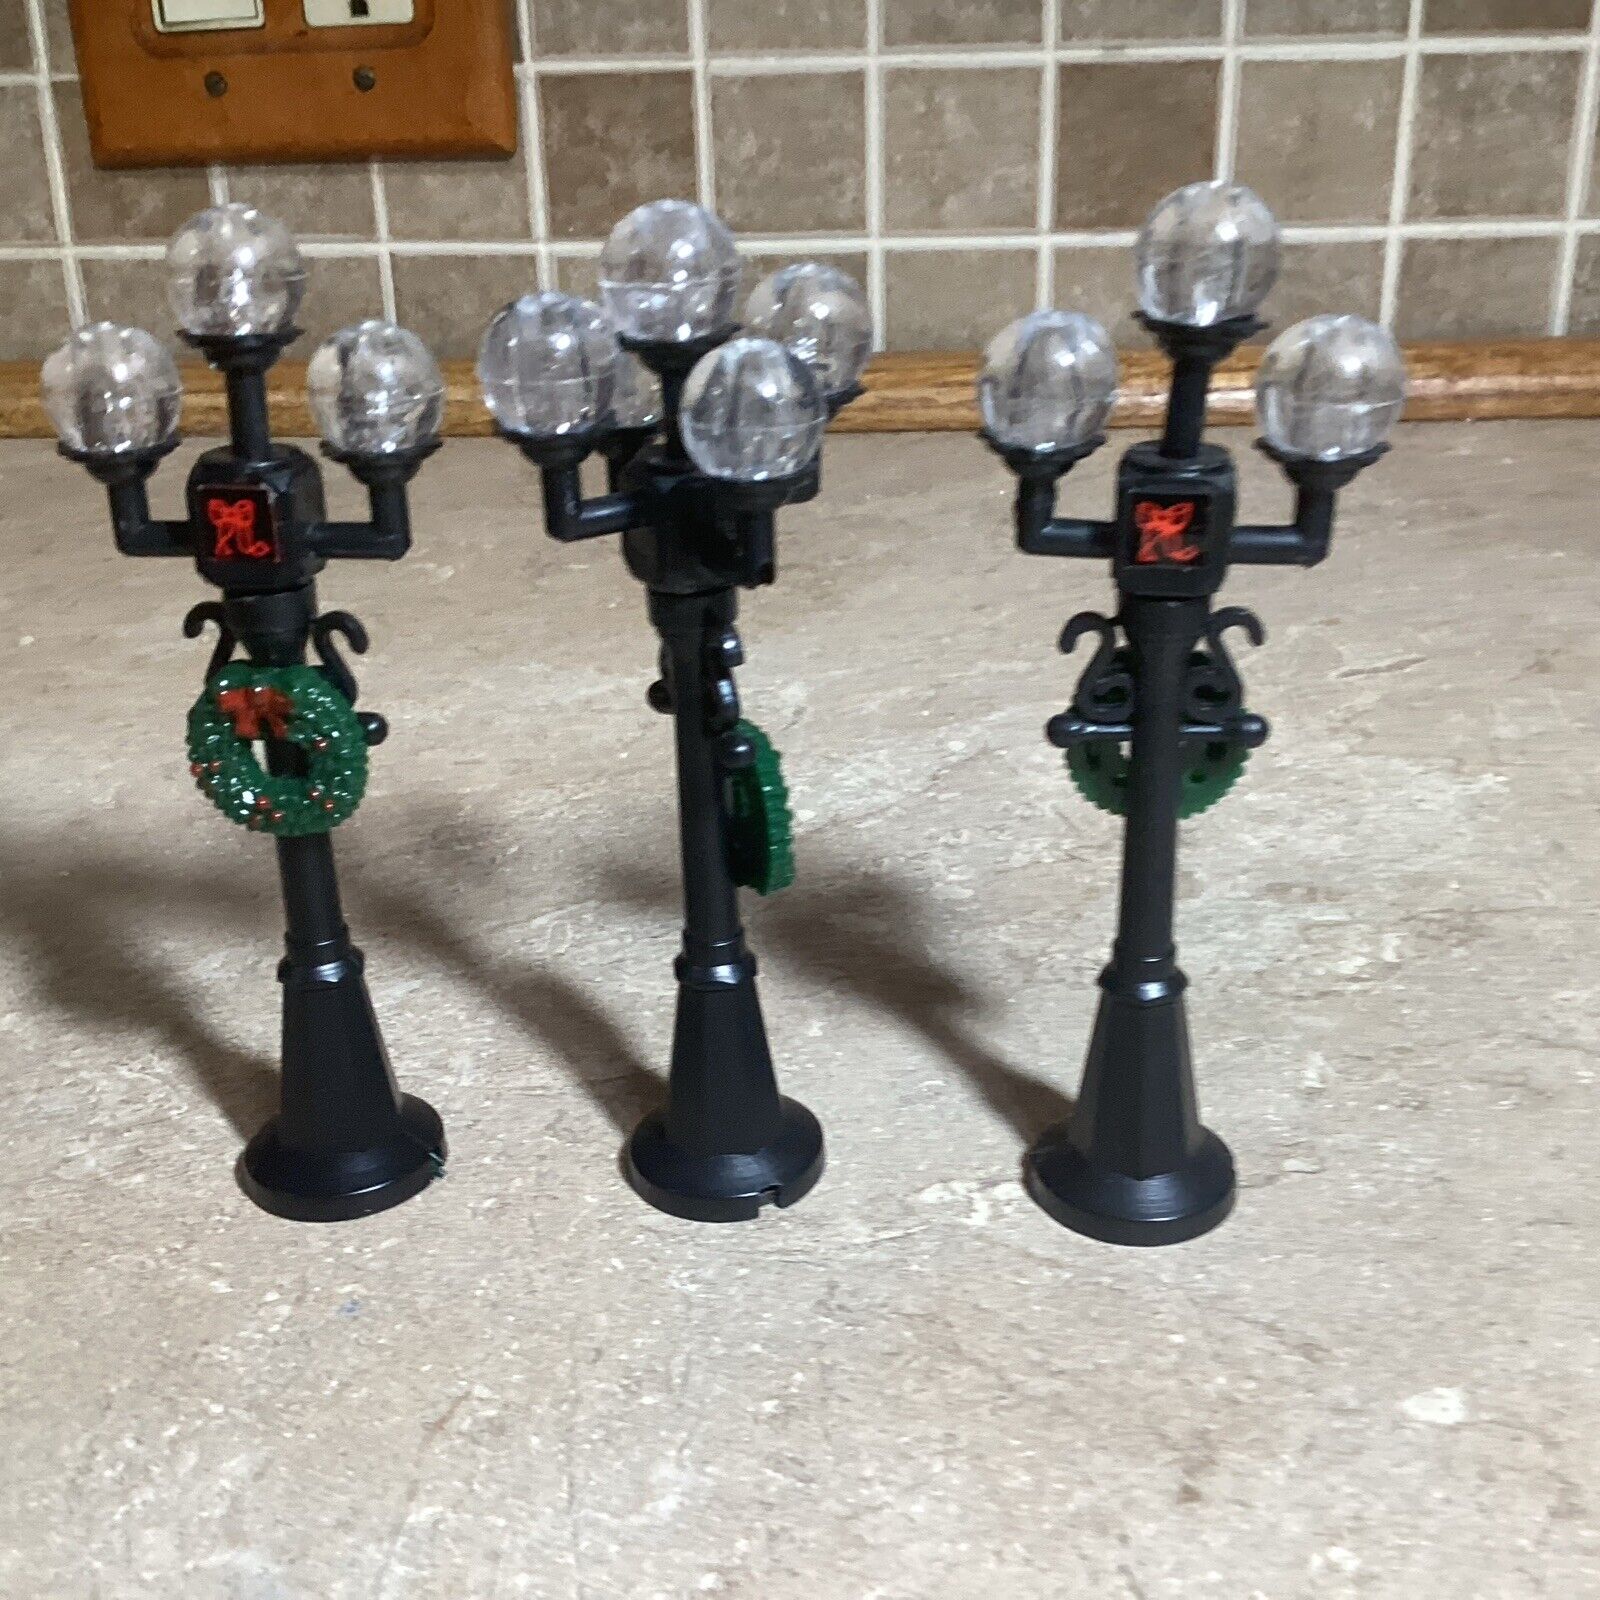 O’WELL Vintage Christmas Village Accessories  - 3 Street Lights 5” Tall